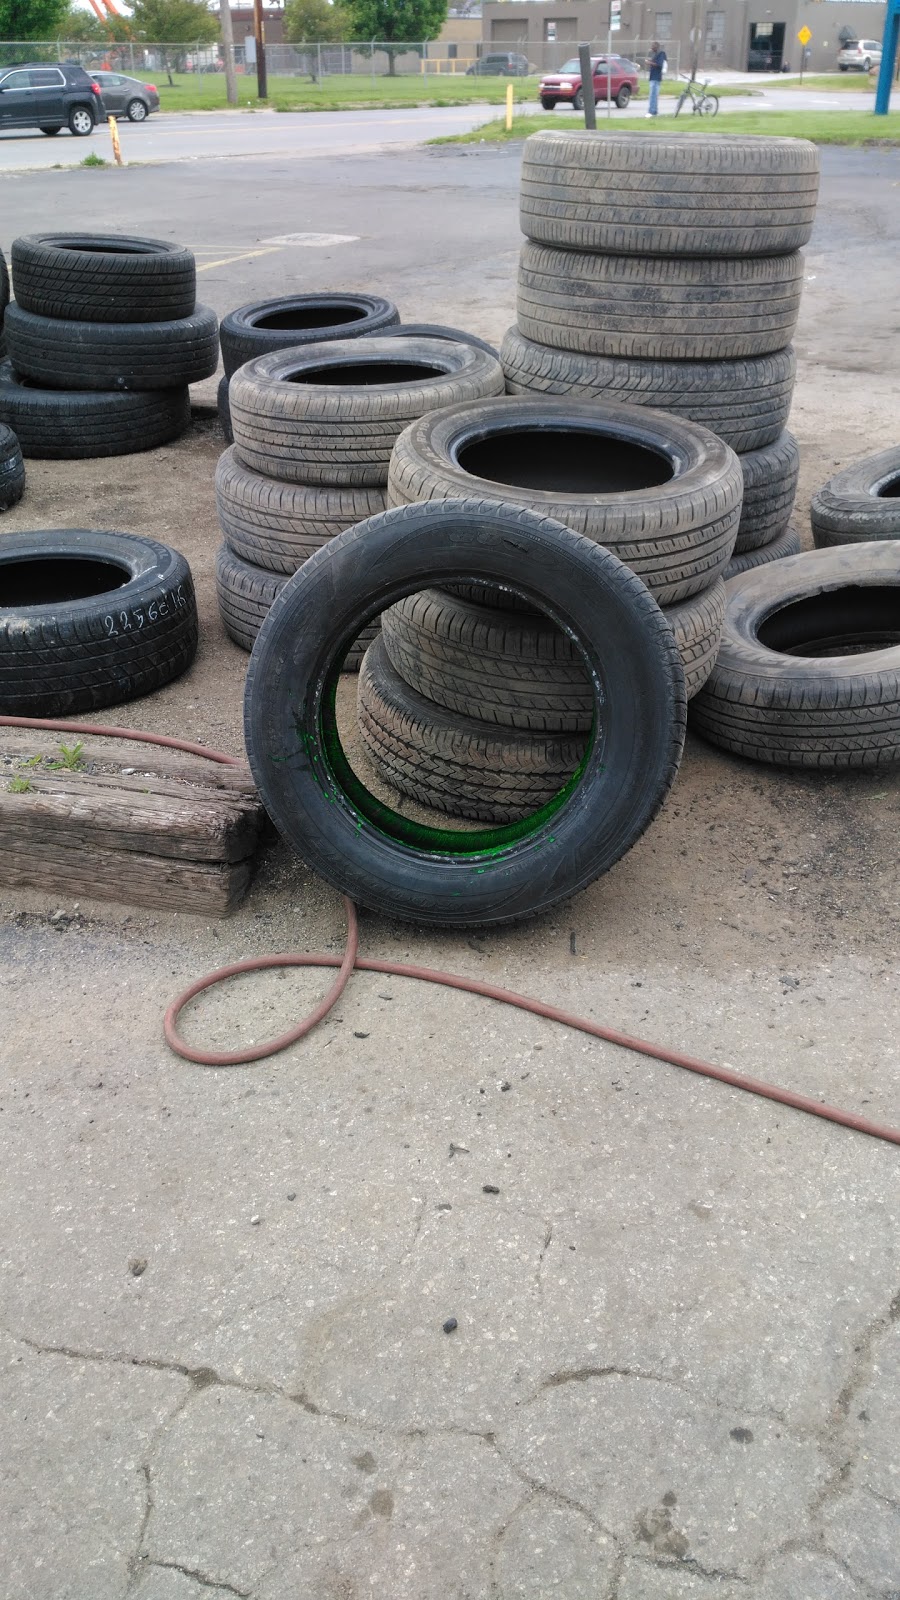 K & M Used Tire | 1400 E 5th Ave #2412, Columbus, OH 43219 | Phone: (614) 251-2280